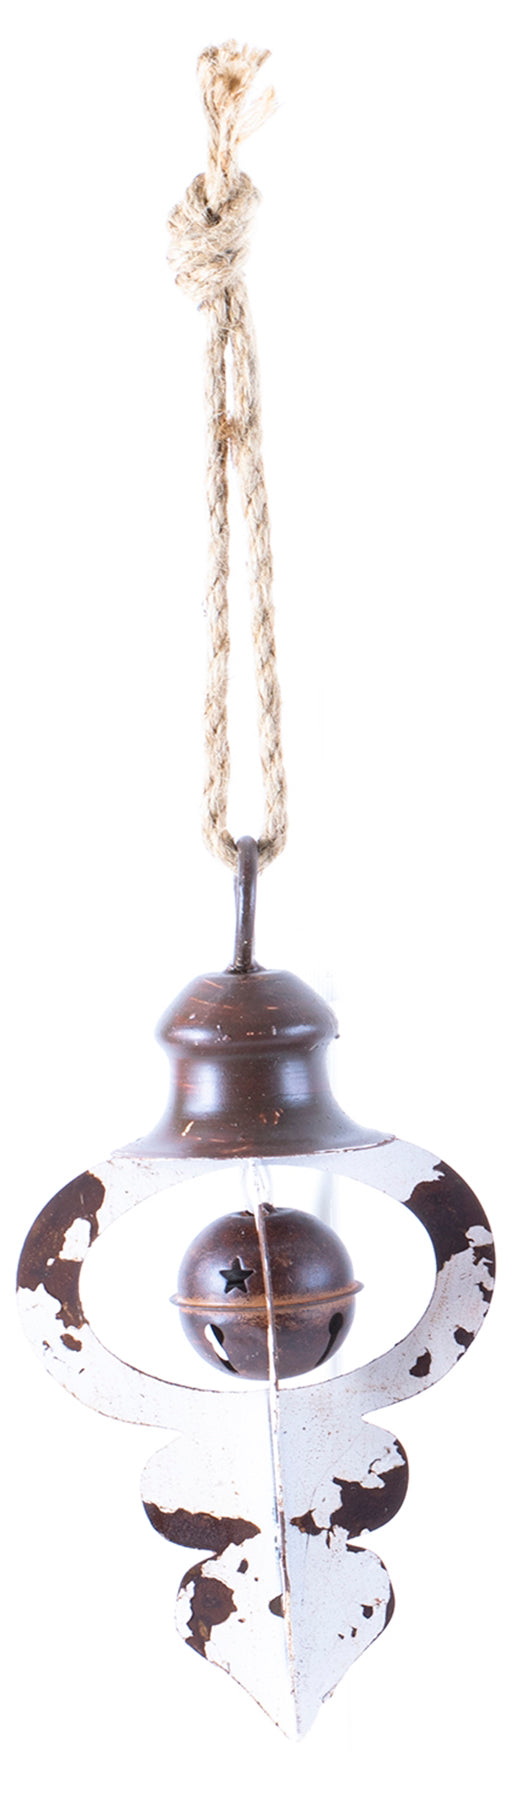 Distressed Metal Ornament With Bell